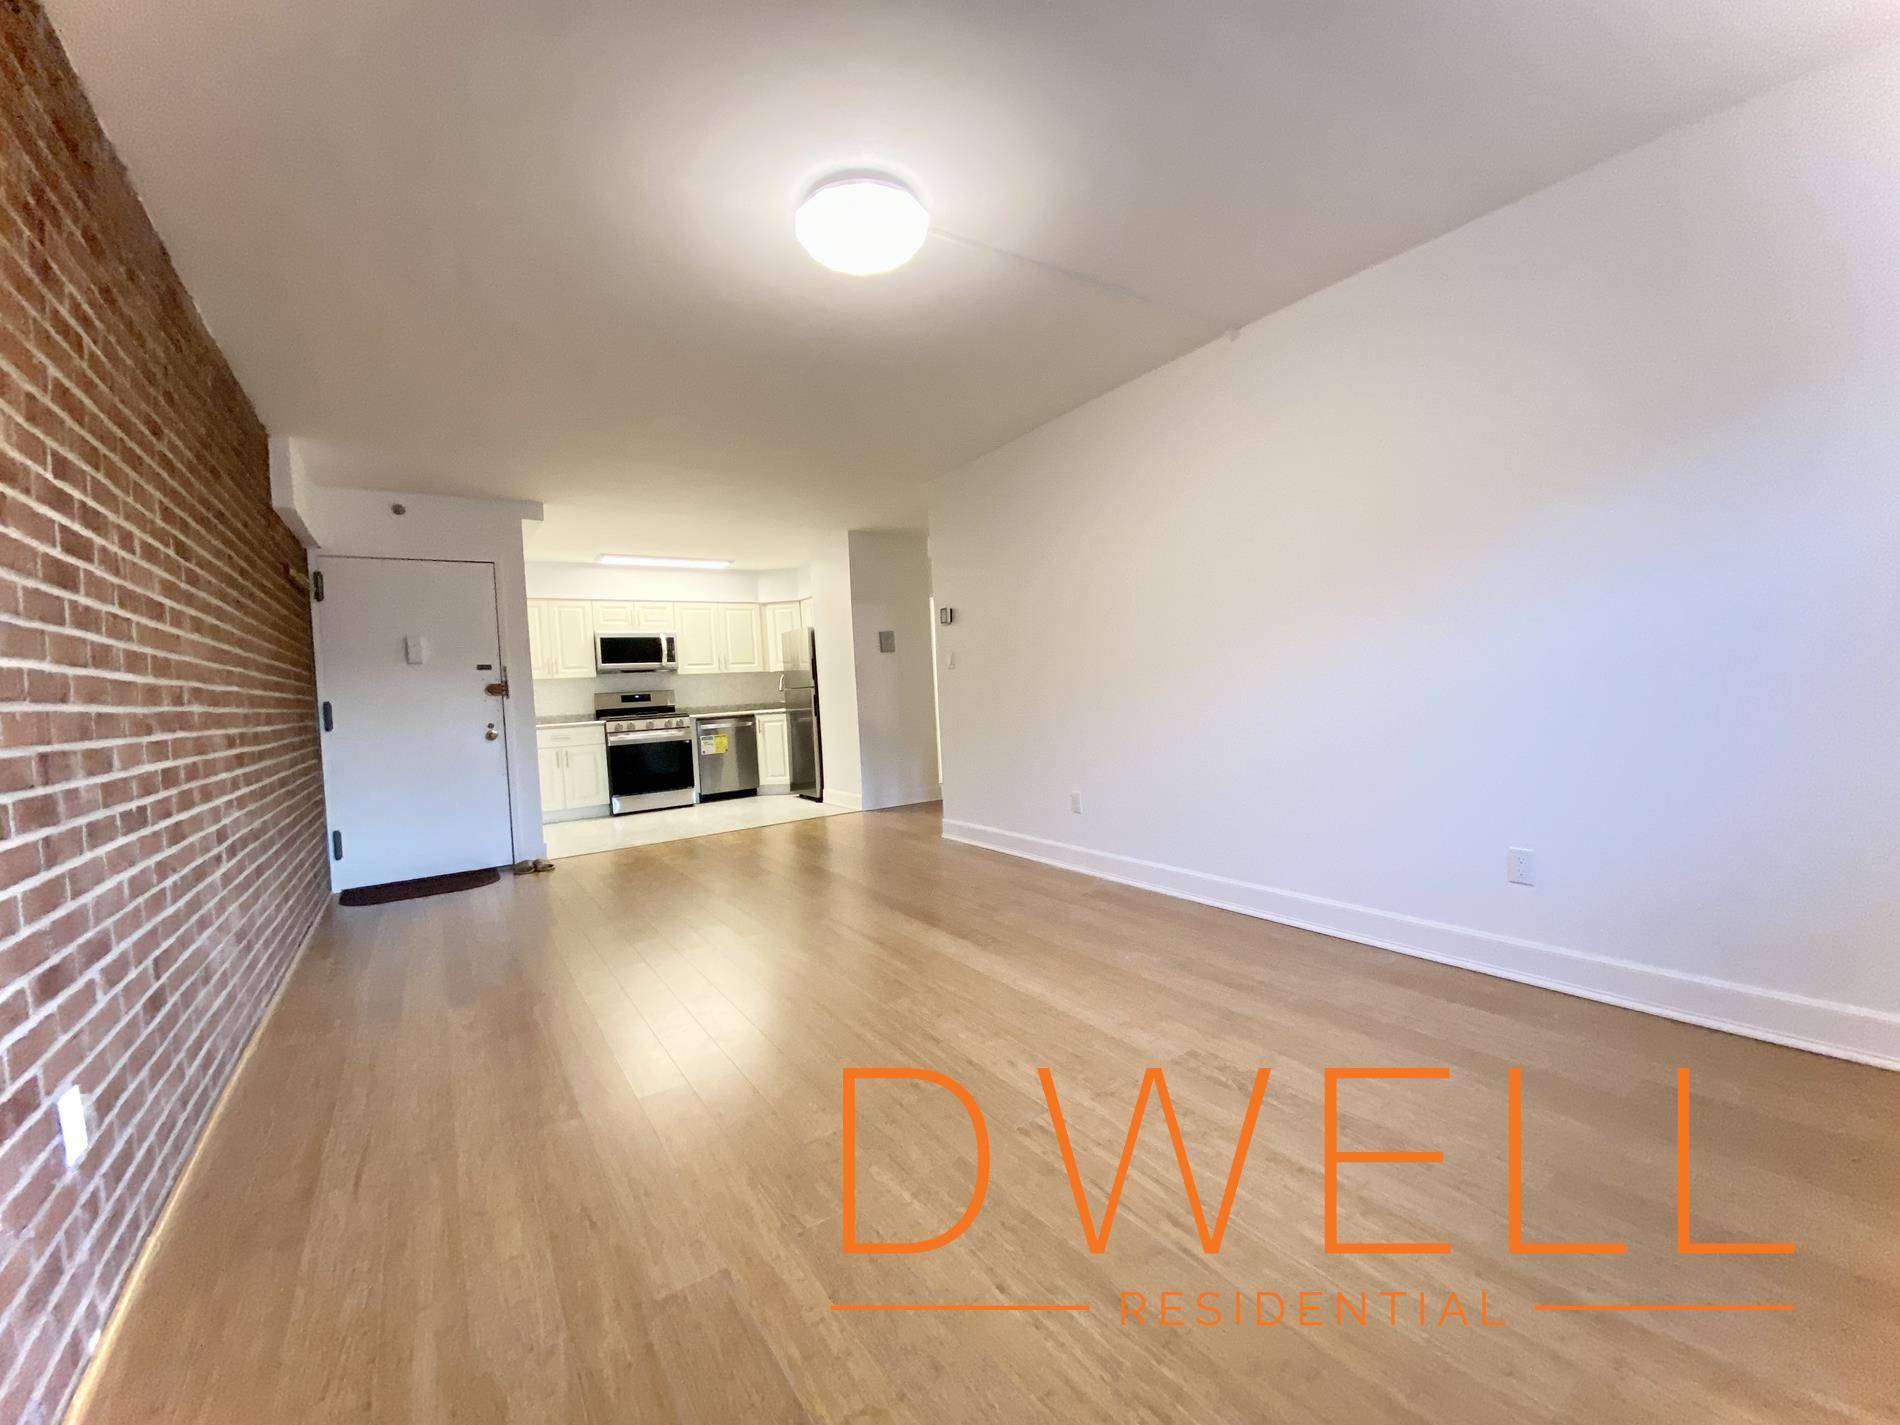 DWELL Residential is proud to present this newly renovated one bedroom.